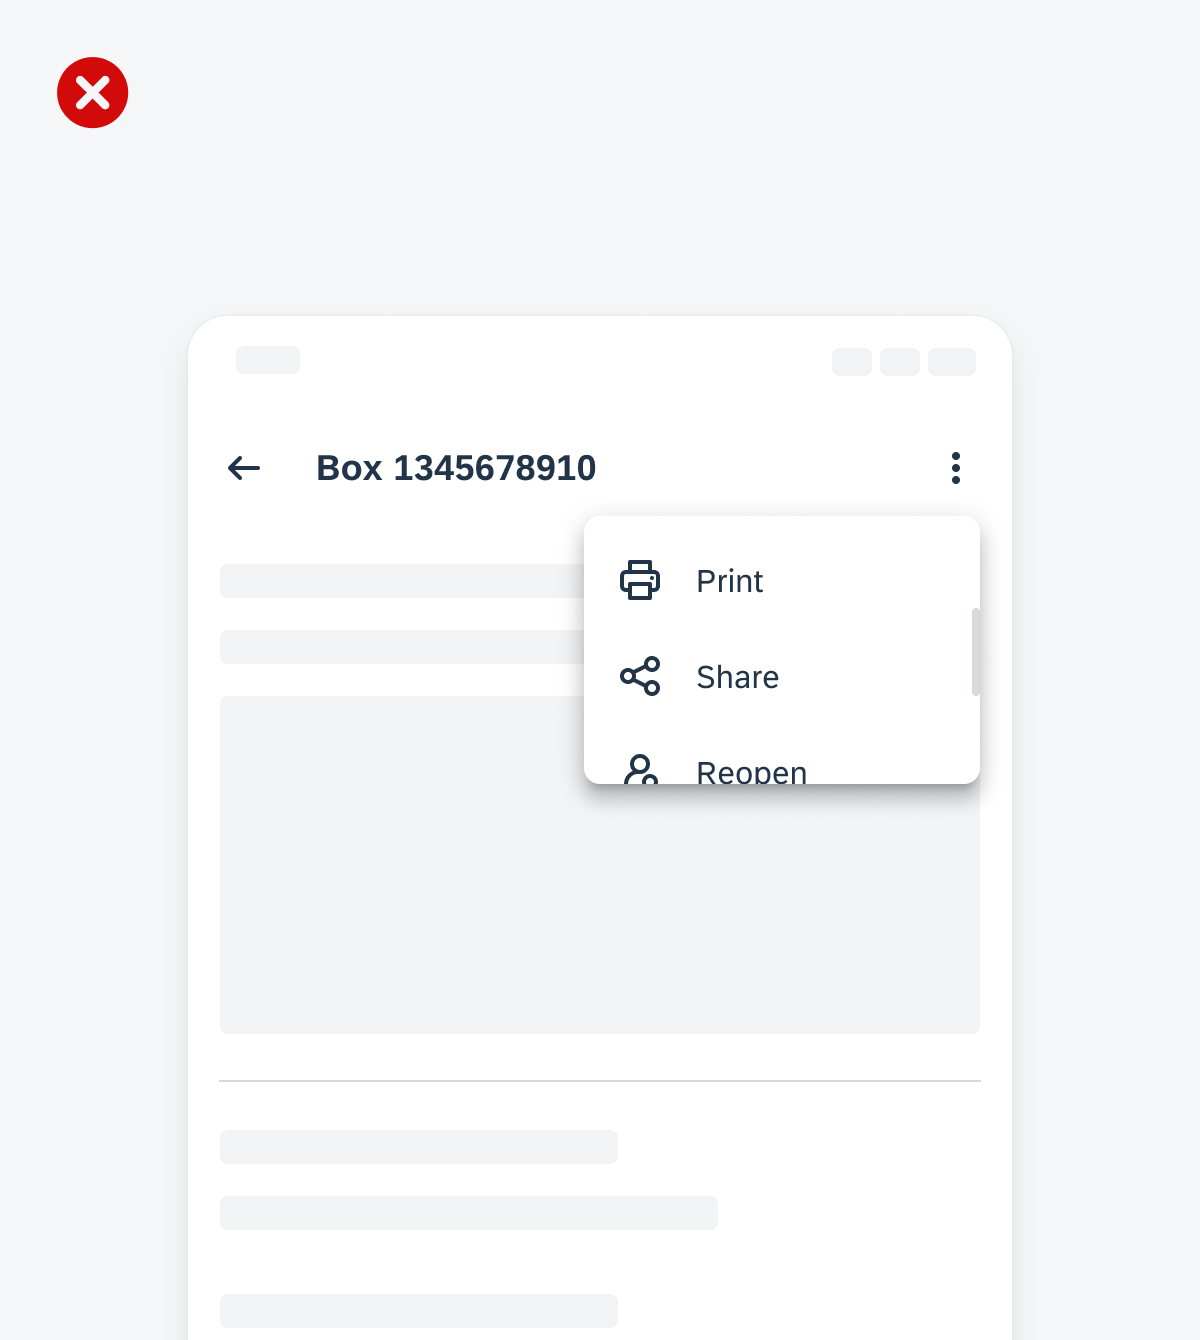 An example of a menu that displays the highest priority actions last and makes the user scroll to find those actions